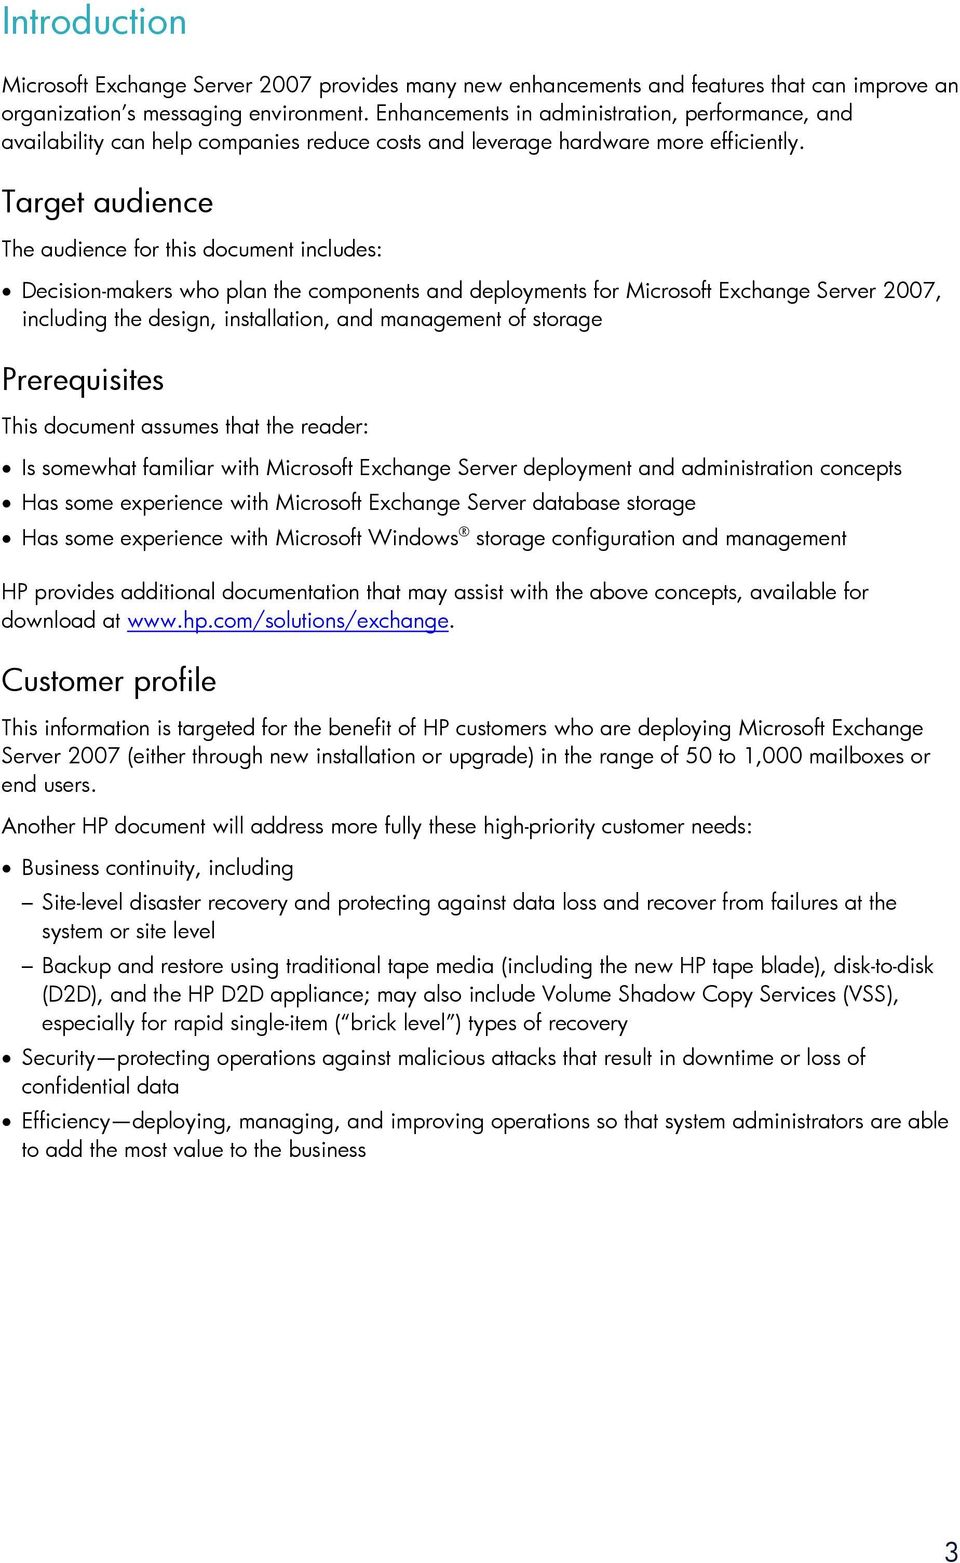 Target audience The audience for this document includes: Decision-makers who plan the components and deployments for Microsoft Exchange Server 2007, including the design, installation, and management